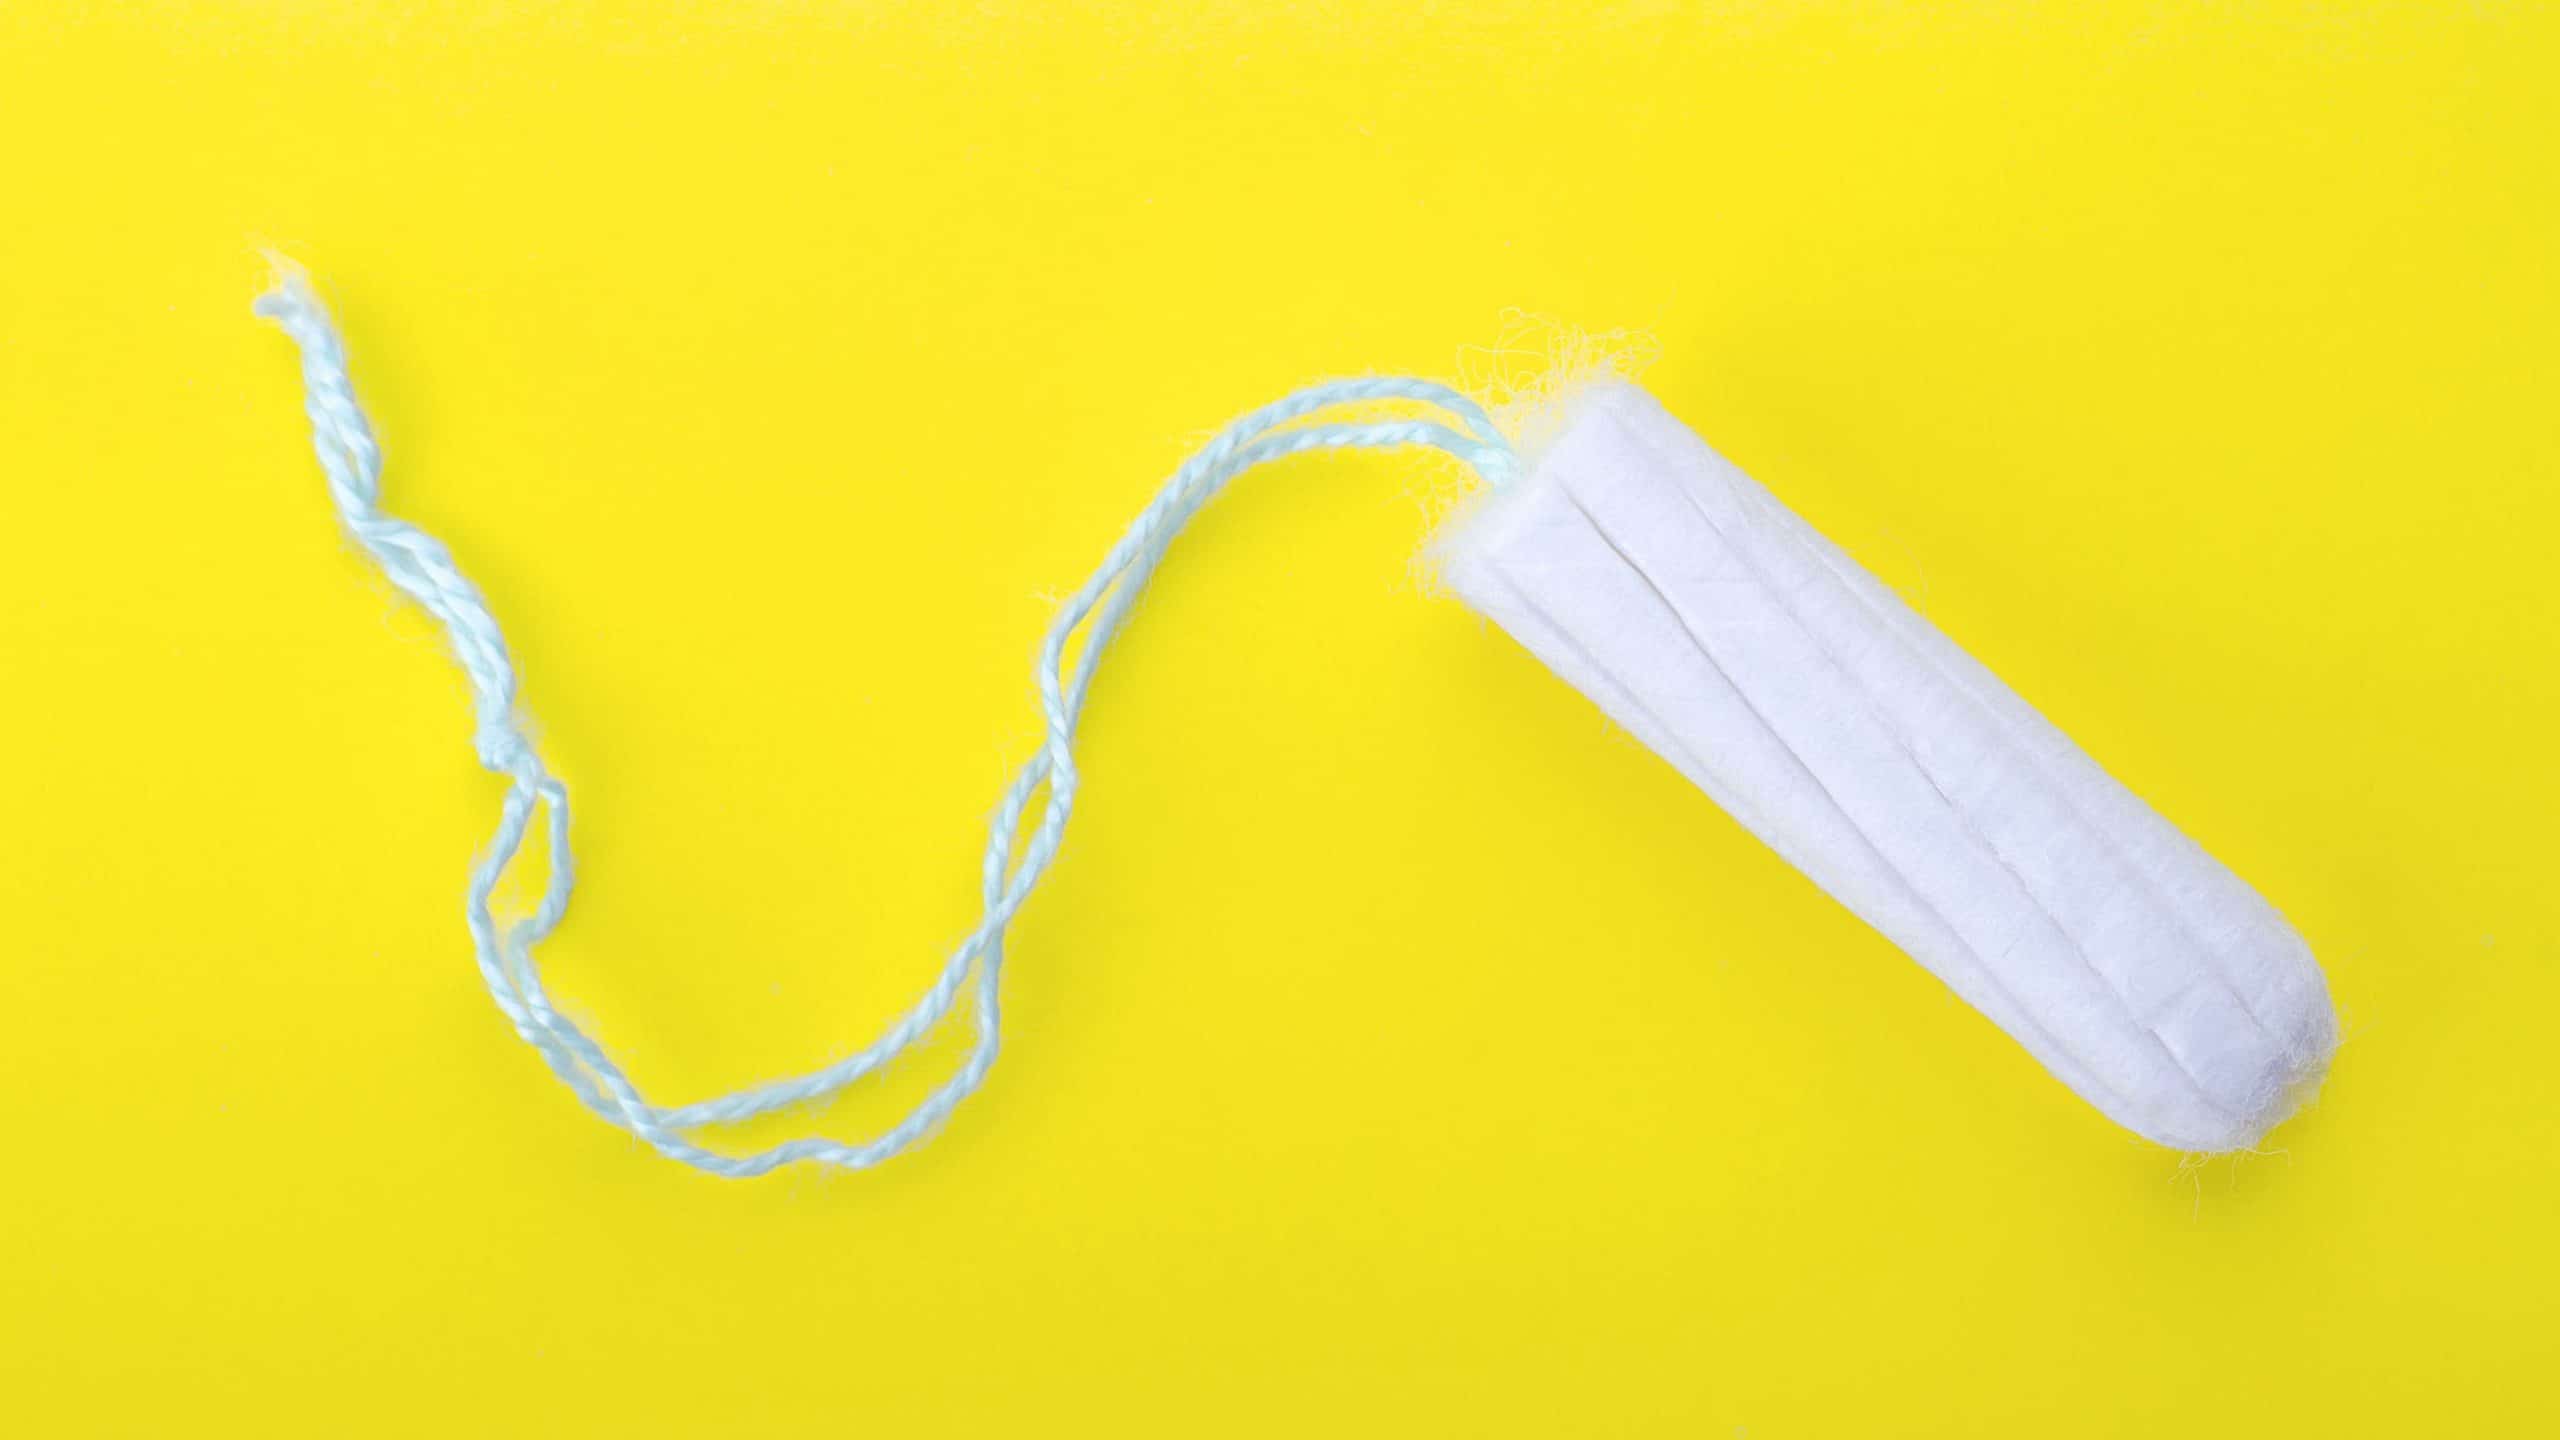 Best reactions as image of tampon labelled ‘obscene’